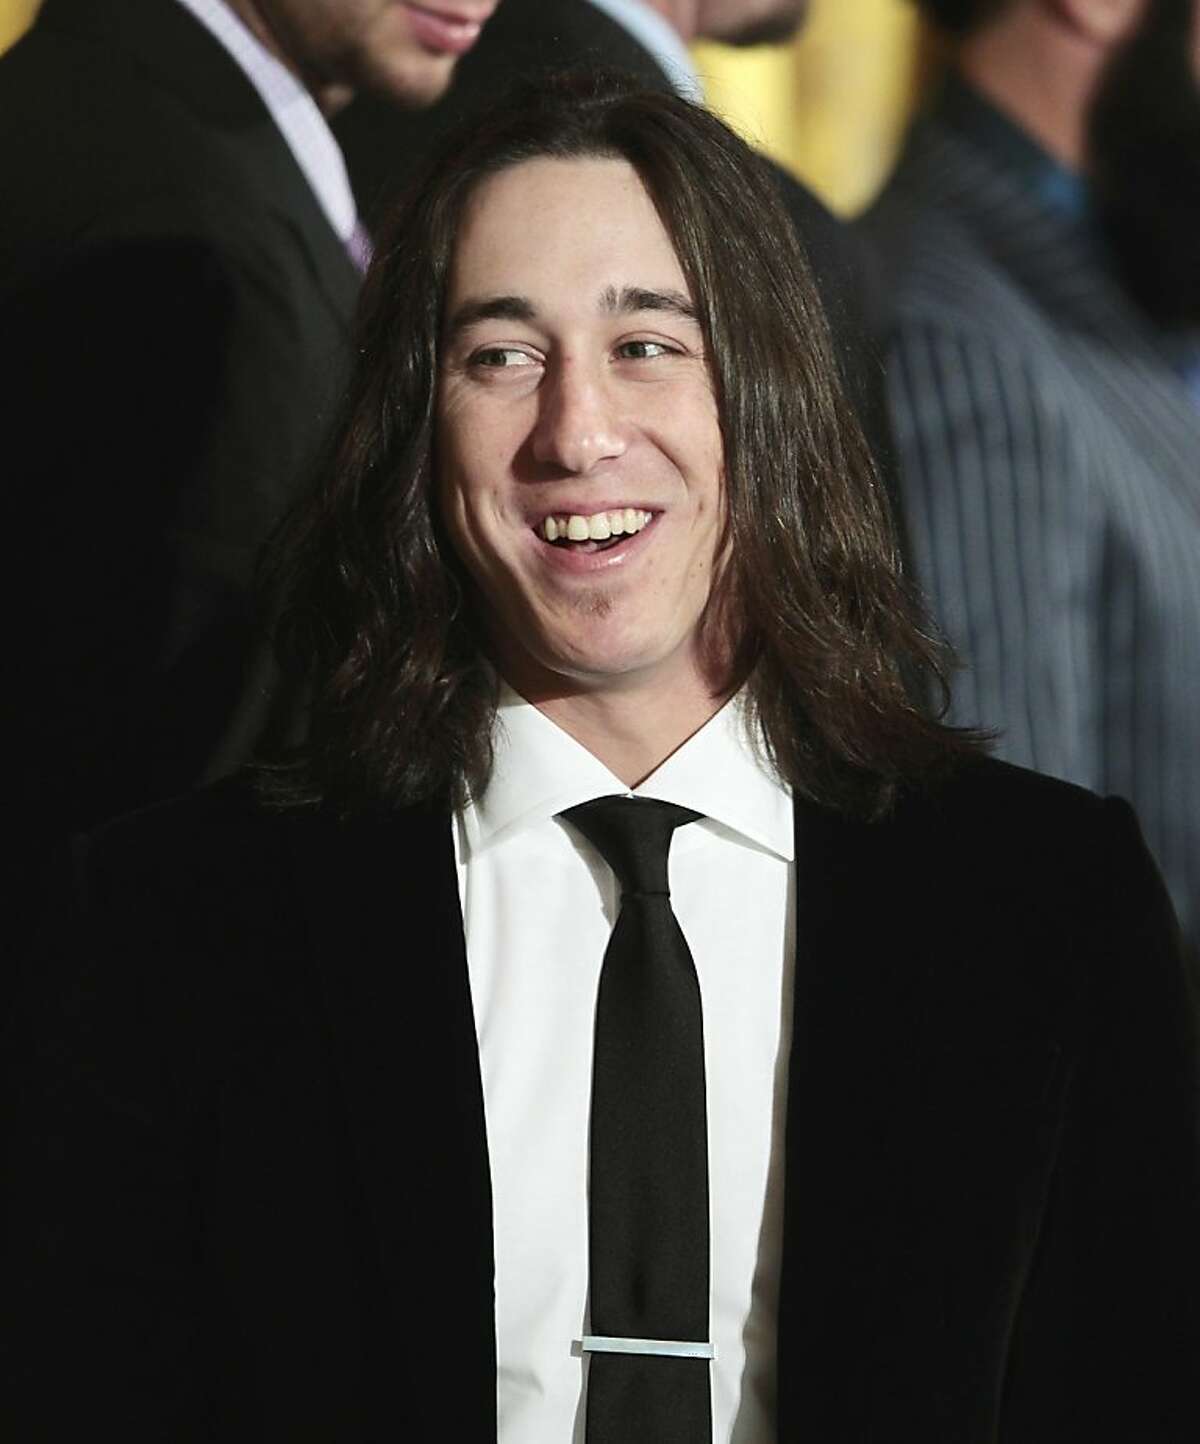 San Francisco Giants baseball pitcher Tim Lincecum is seen in the East Room of the White House in Washington, Monday, July 25, 2011, during a ceremony honoring the 2010 World Series baseball champions. (AP Photo/Pablo Martinez Monsivais